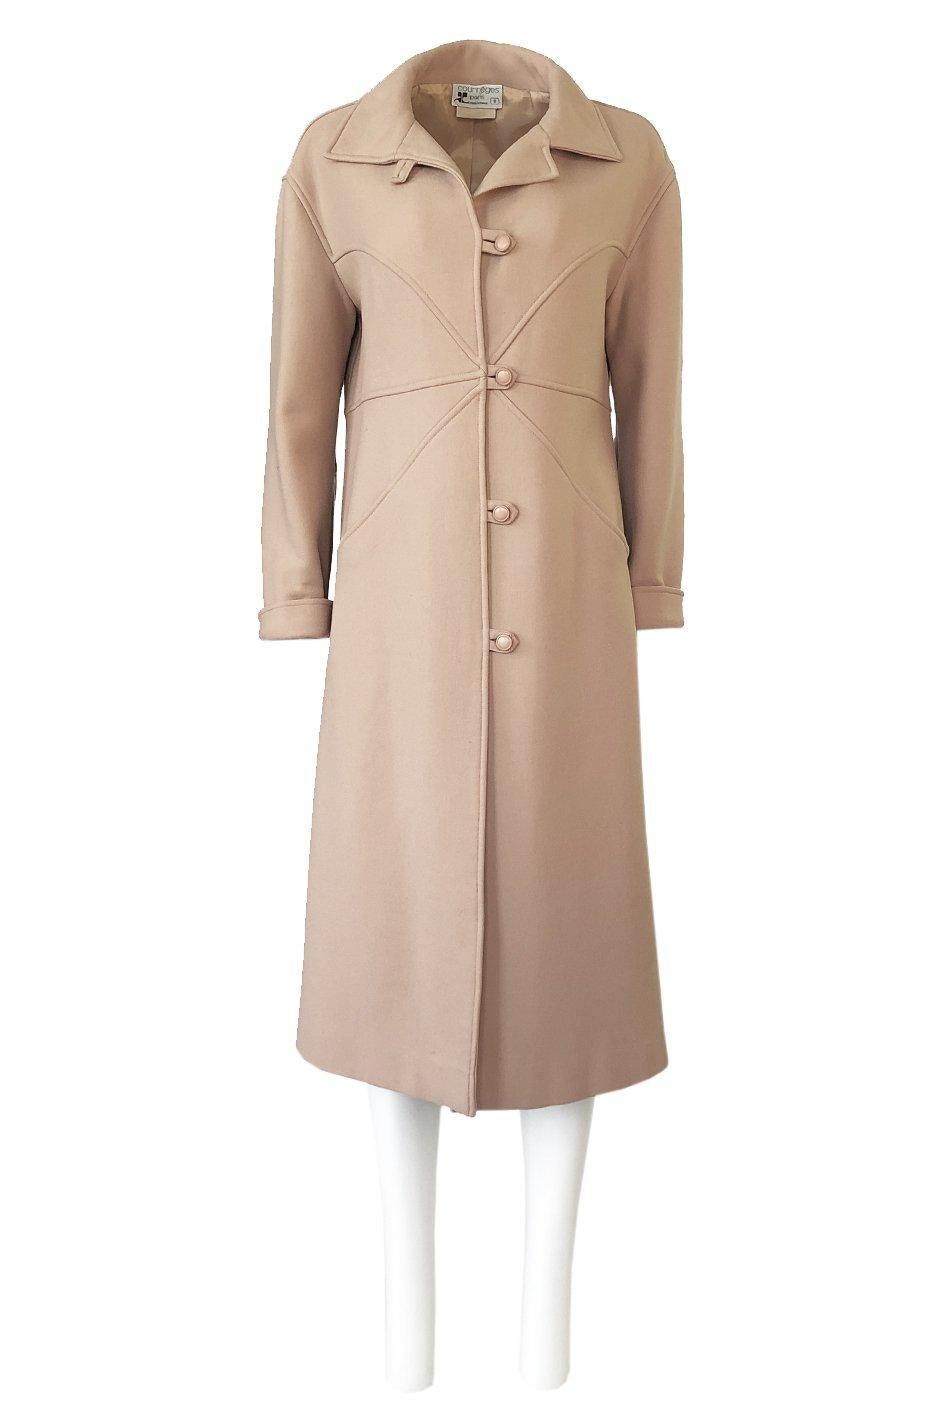 Immaculate 1960s Courreges Unusually Seamed Camel Toggle Coat 1